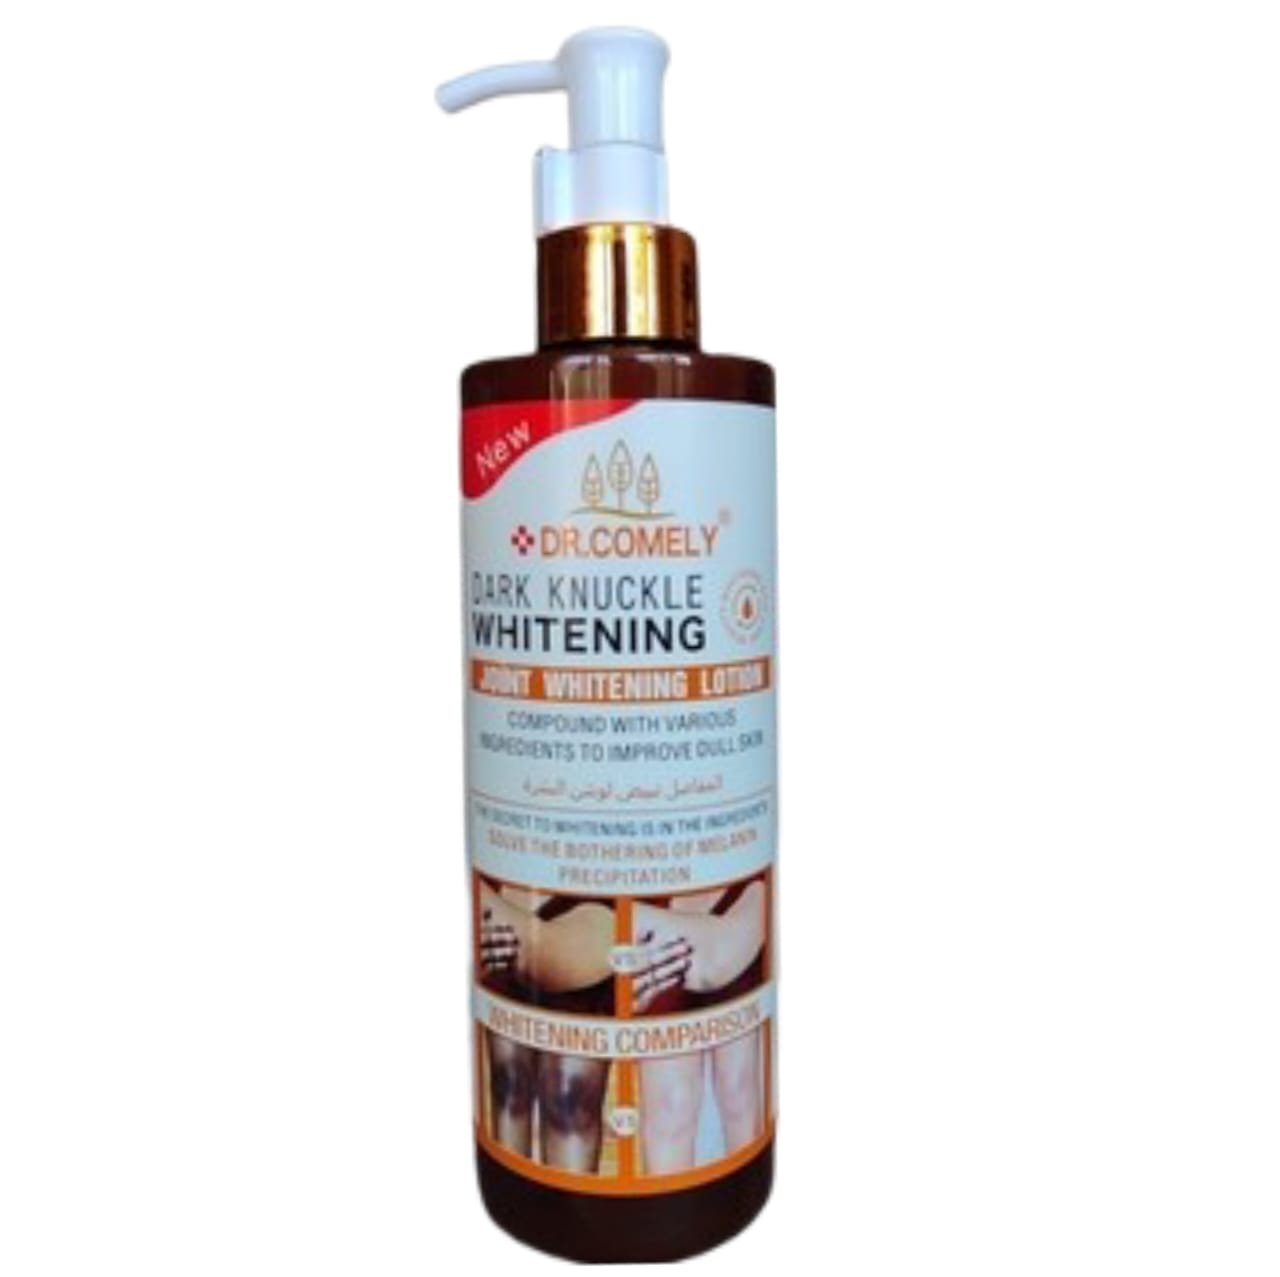 DR.Comely Dark Knuckle Whitening Joint Whitening Lotion